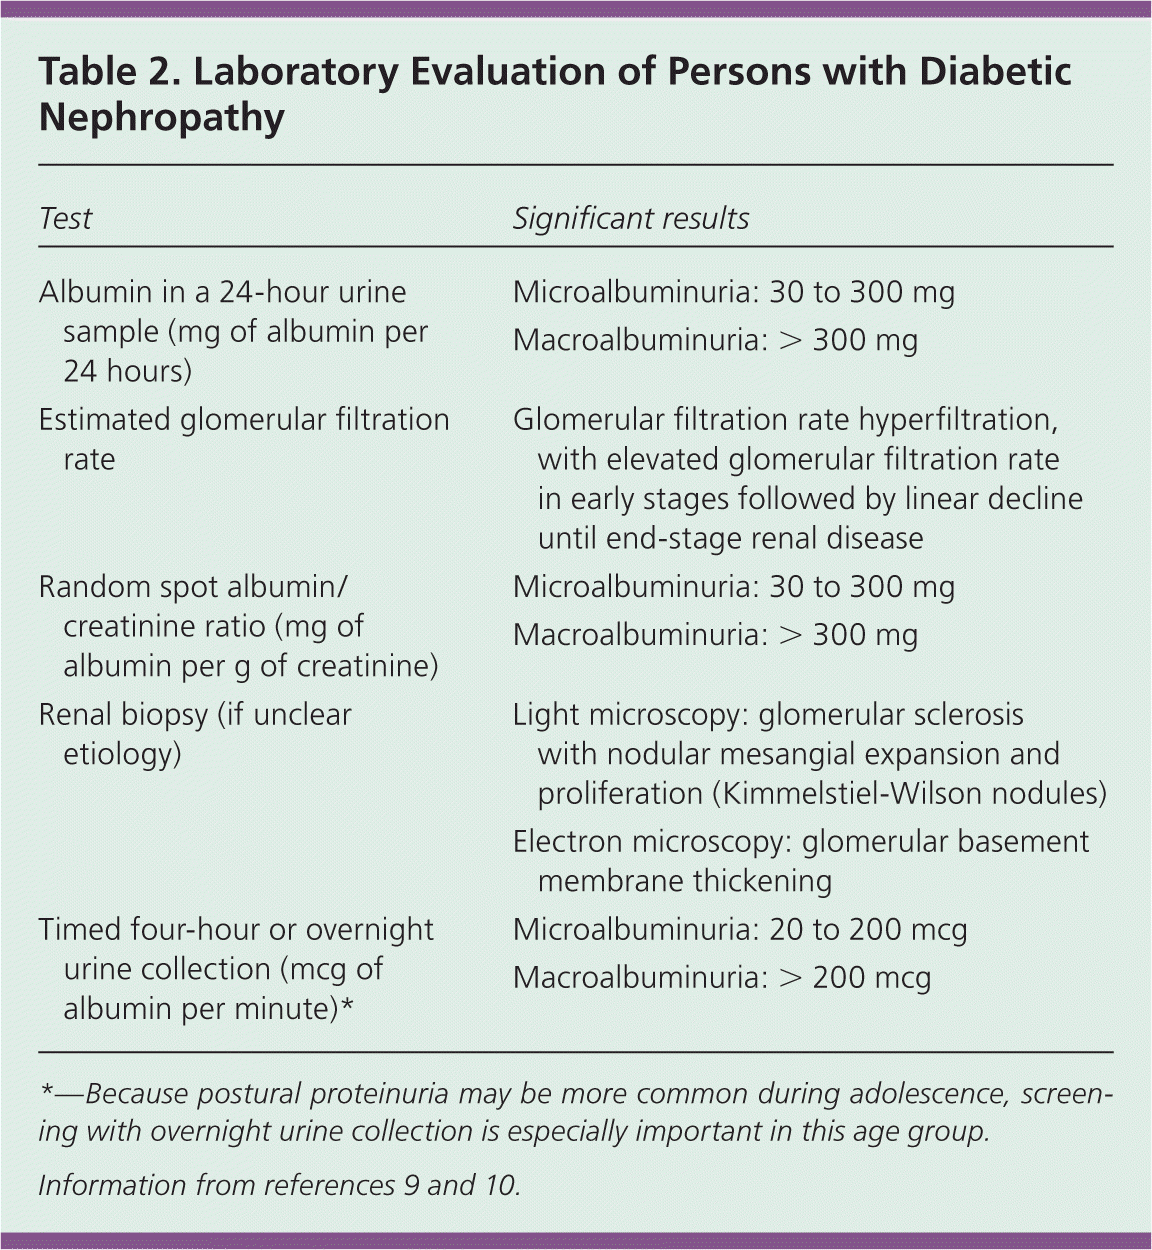 diabetic-nephropathy-the-family-physician-s-role-aafp